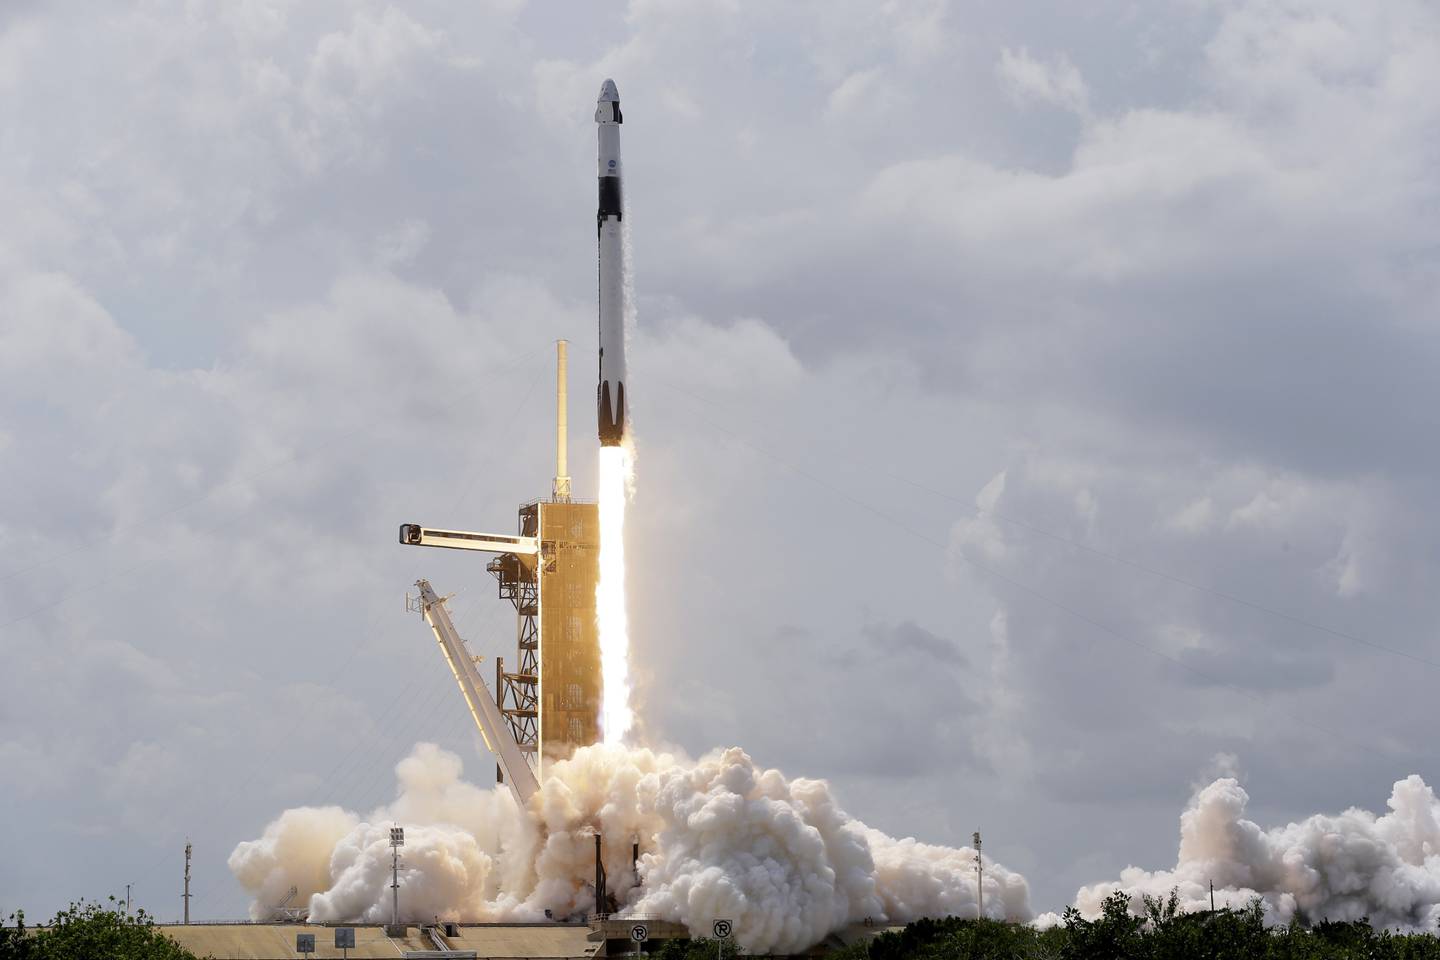 A SpaceX Falcon 9, with NASA astronauts Doug Hurley and Bob Behnken in the Crew Dragon capsule, lifts off from Pad 39-A at the Kennedy Space Center in Cape Canaveral, Fla., Saturday, May 30, 2020.